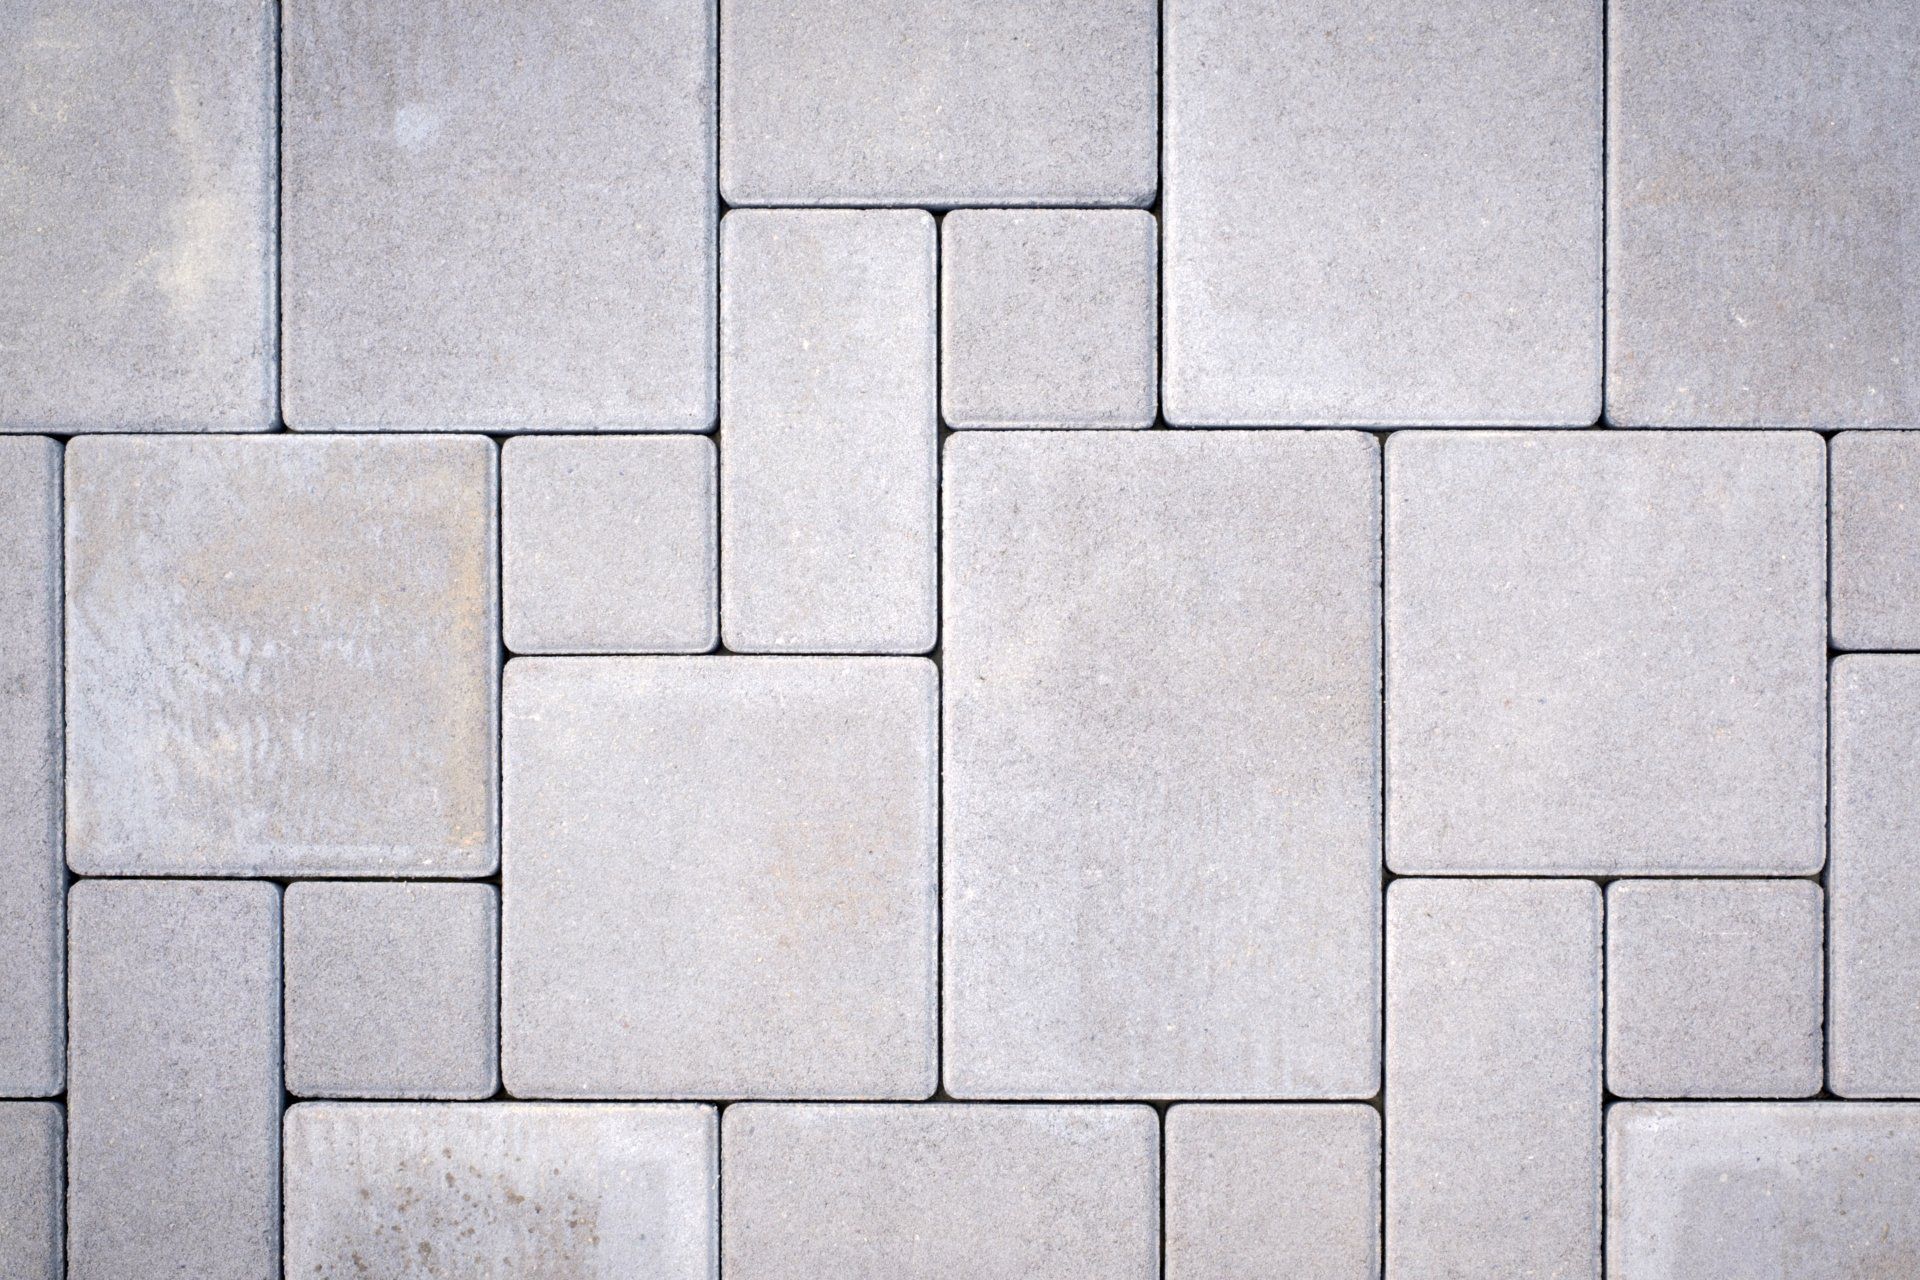 Gray concrete paving stones in a beautiful pattern.